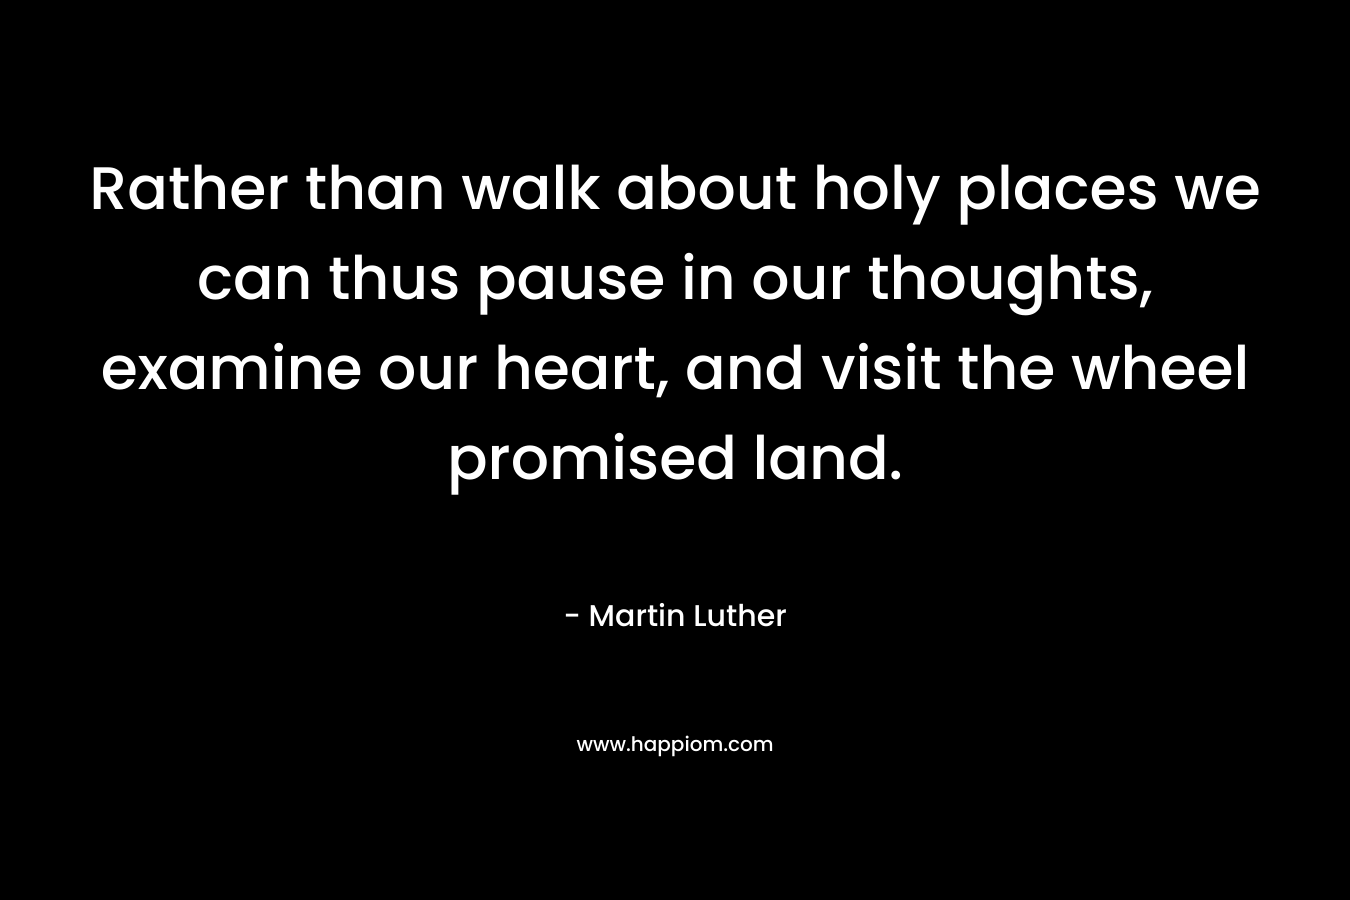 Rather than walk about holy places we can thus pause in our thoughts, examine our heart, and visit the wheel promised land.